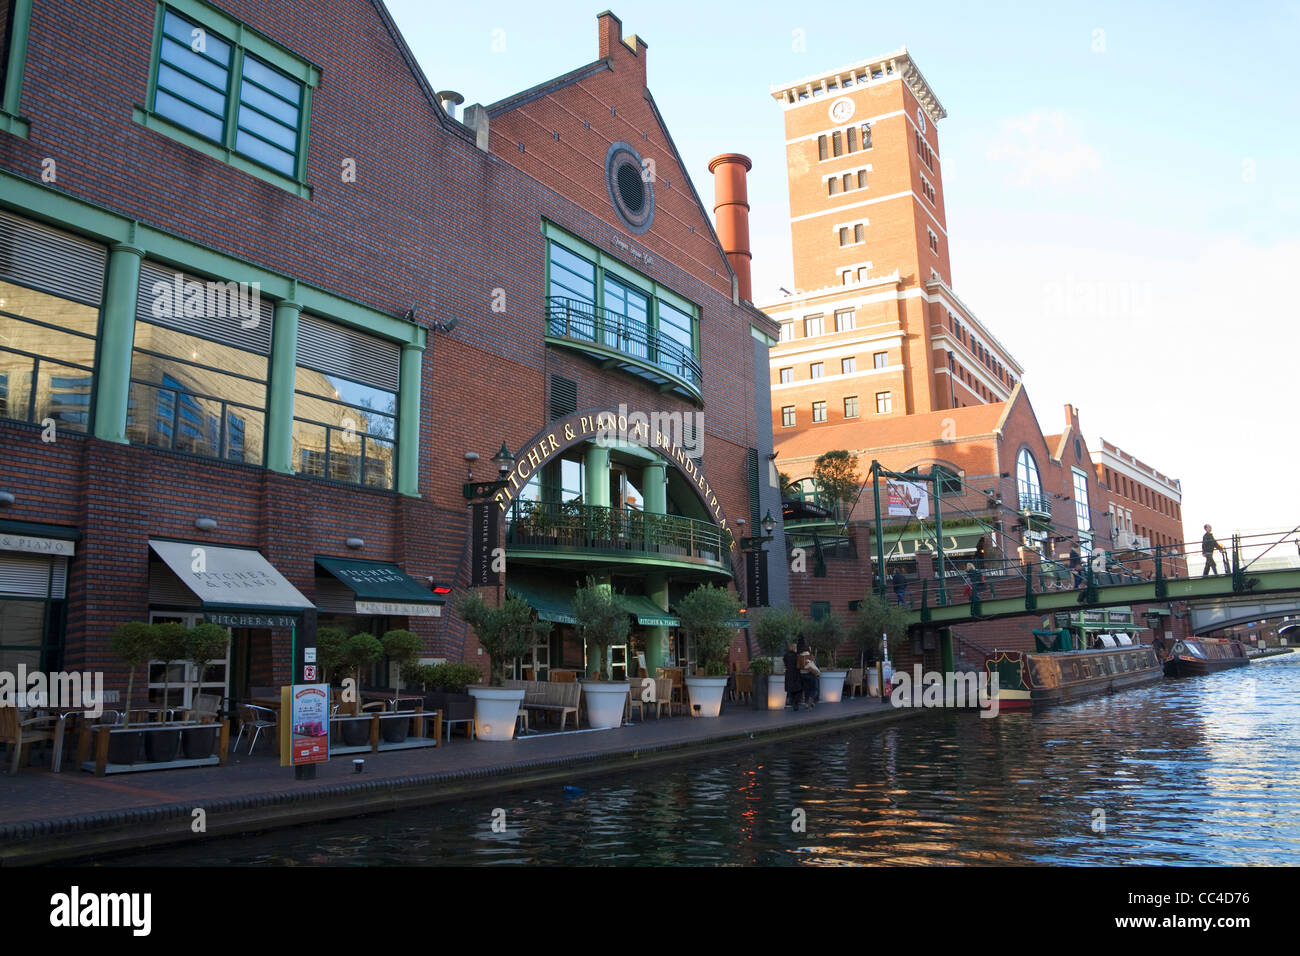 Birmingham West Midlands Bars and restaurants canal side in Stock Photo